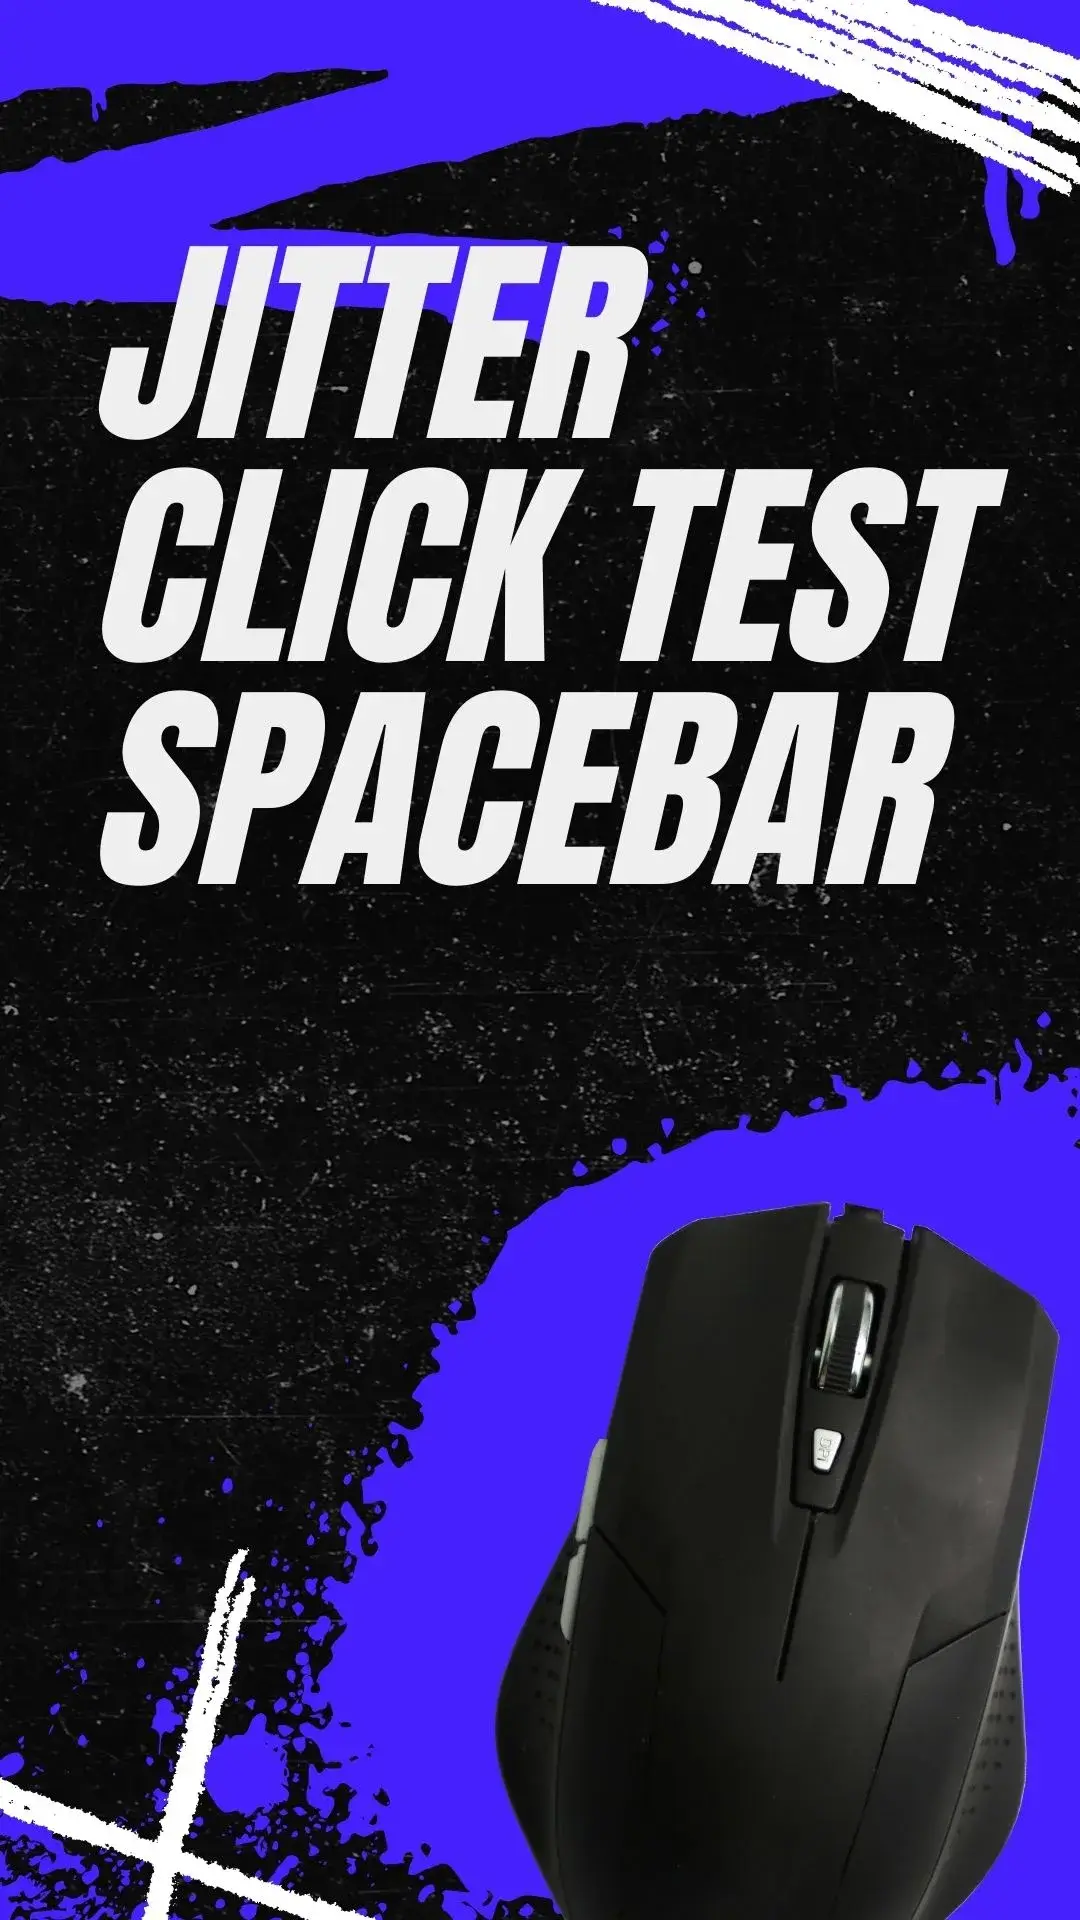 space bar clicker for gaming